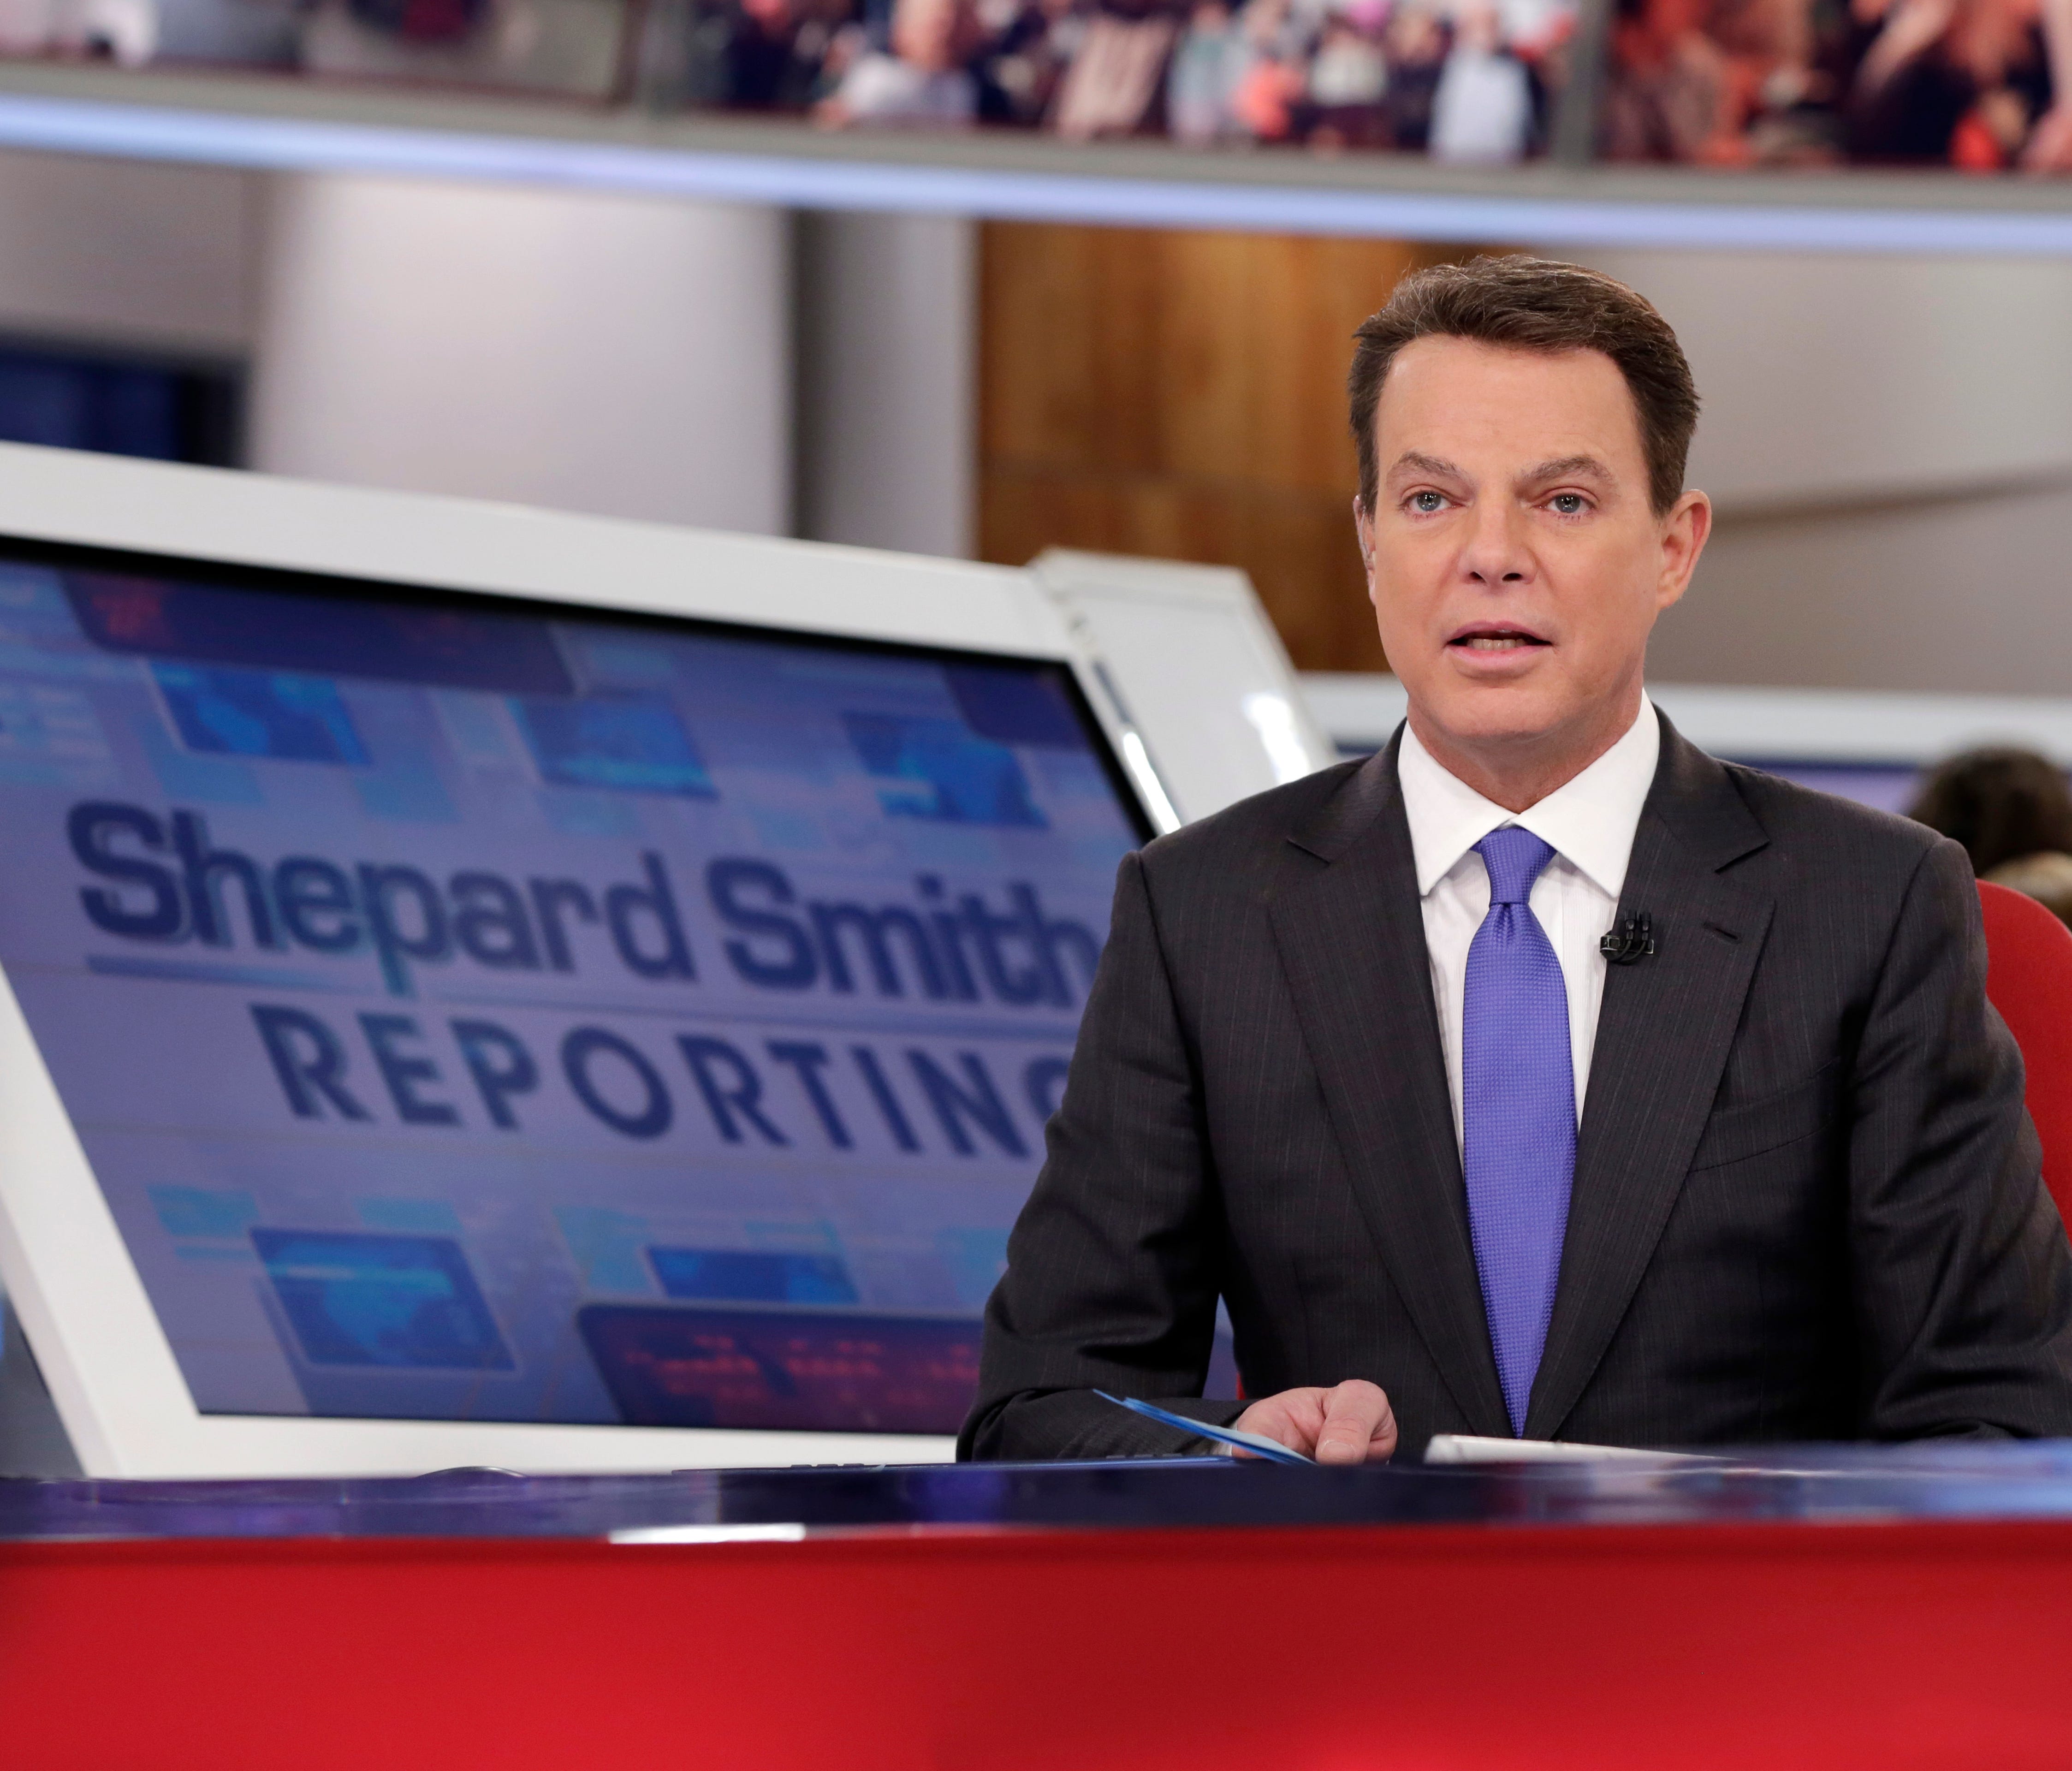 Fox News Channel chief news anchor Shepard Smith broadcasts from The Fox News Deck during his 